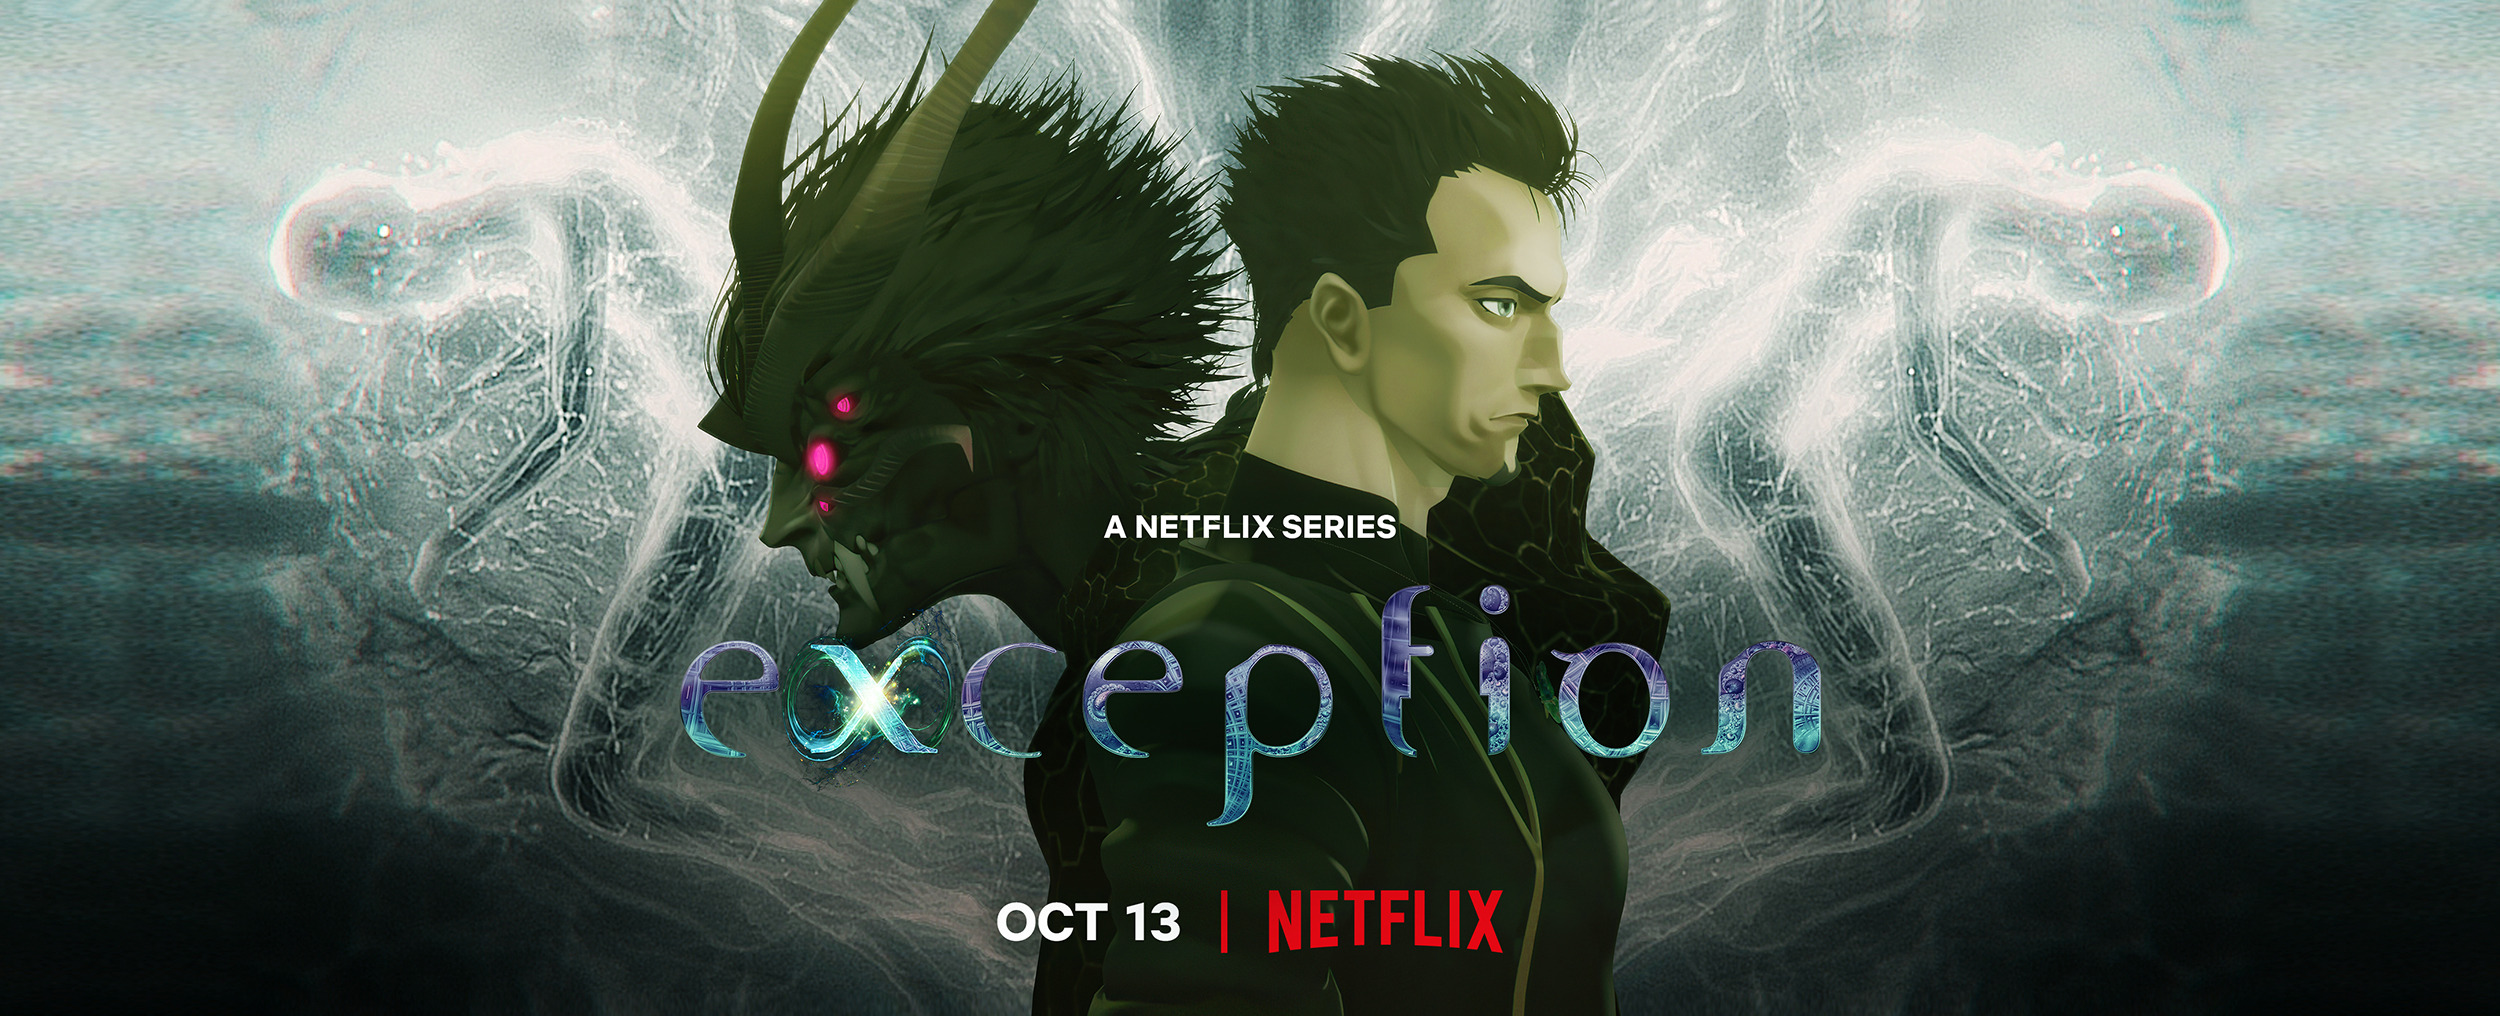 Mega Sized TV Poster Image for Exception 